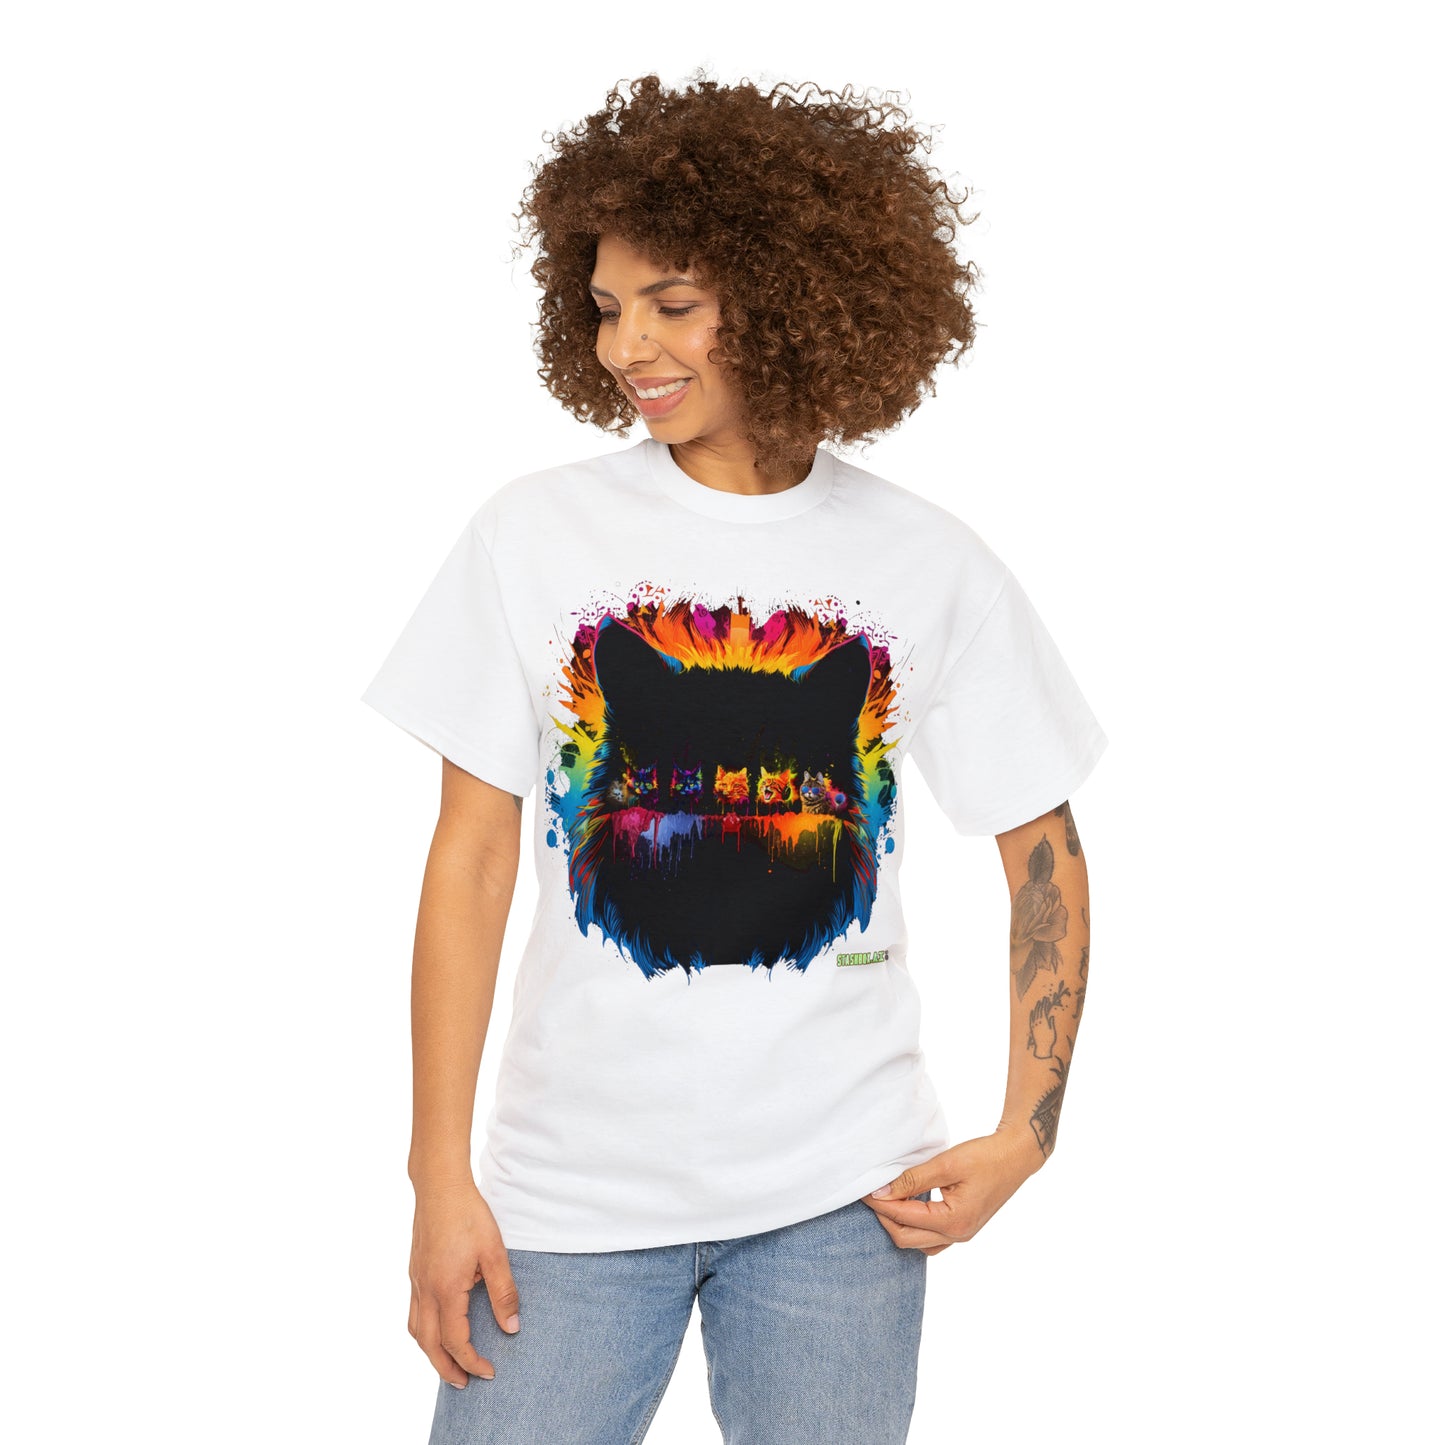 Unisex Adult Size Heavy Cotton Tshirt Colorful Cats 004